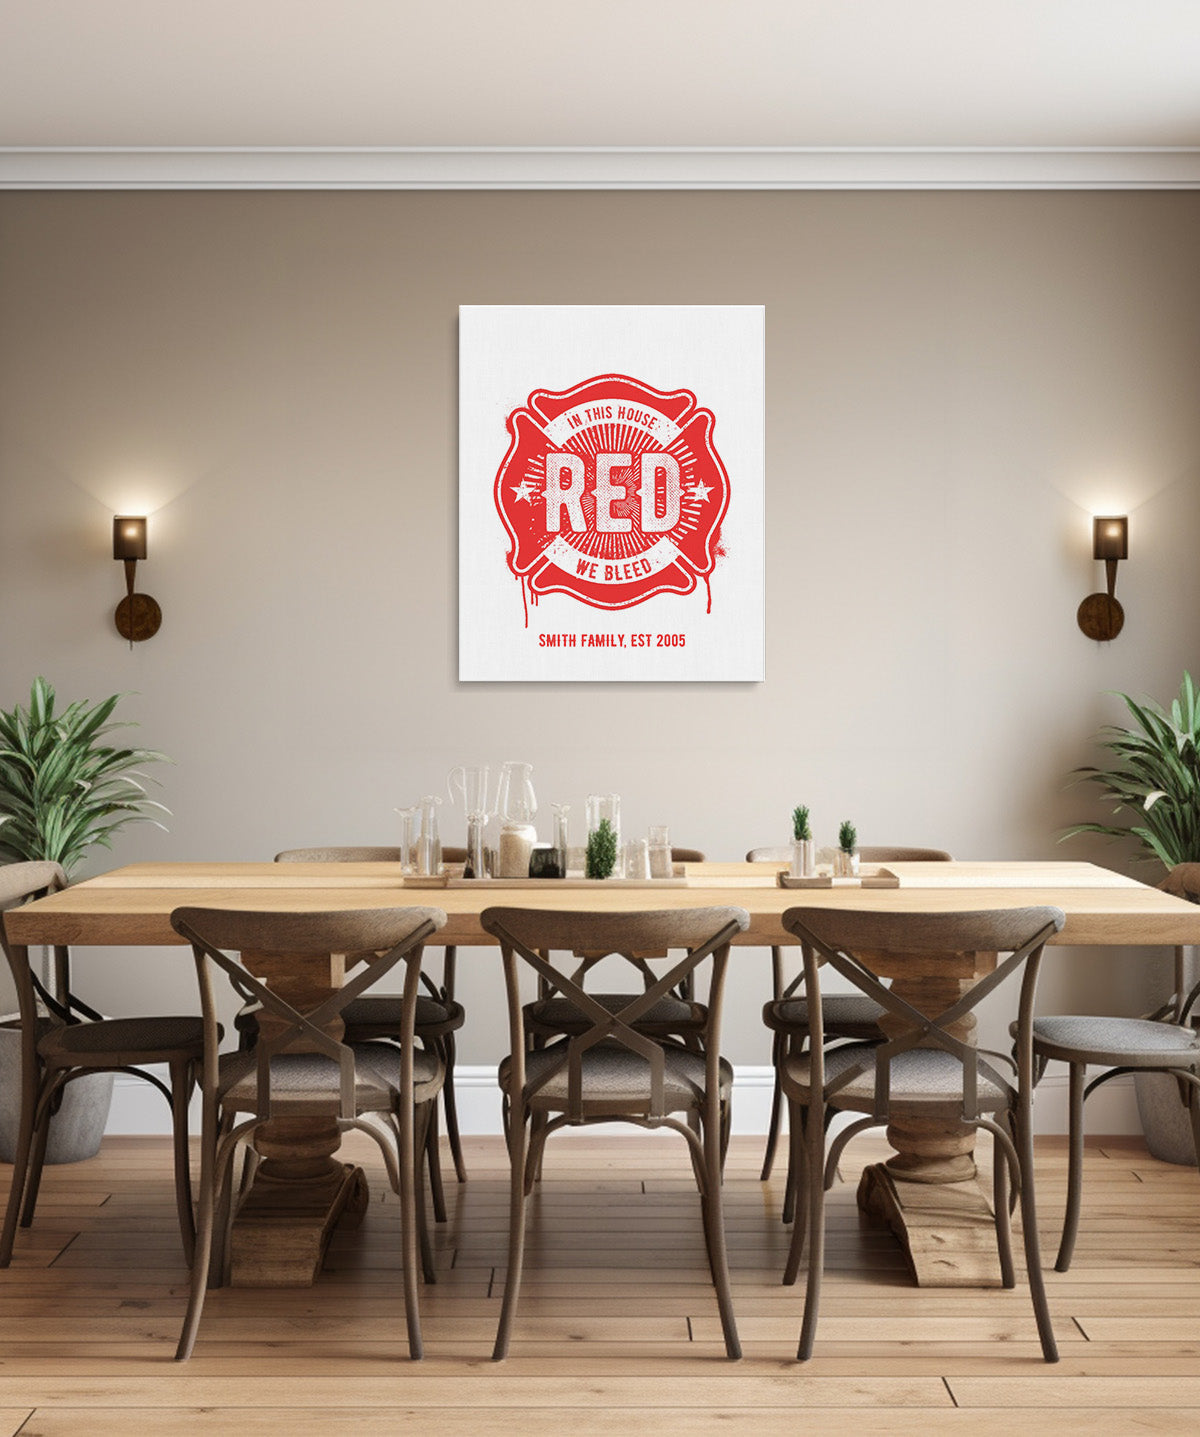 Customizable Firefighter - In This House We Bleed Red (FAMILY NAME & YEAR) - Wall Decor Art Canvas with a white background